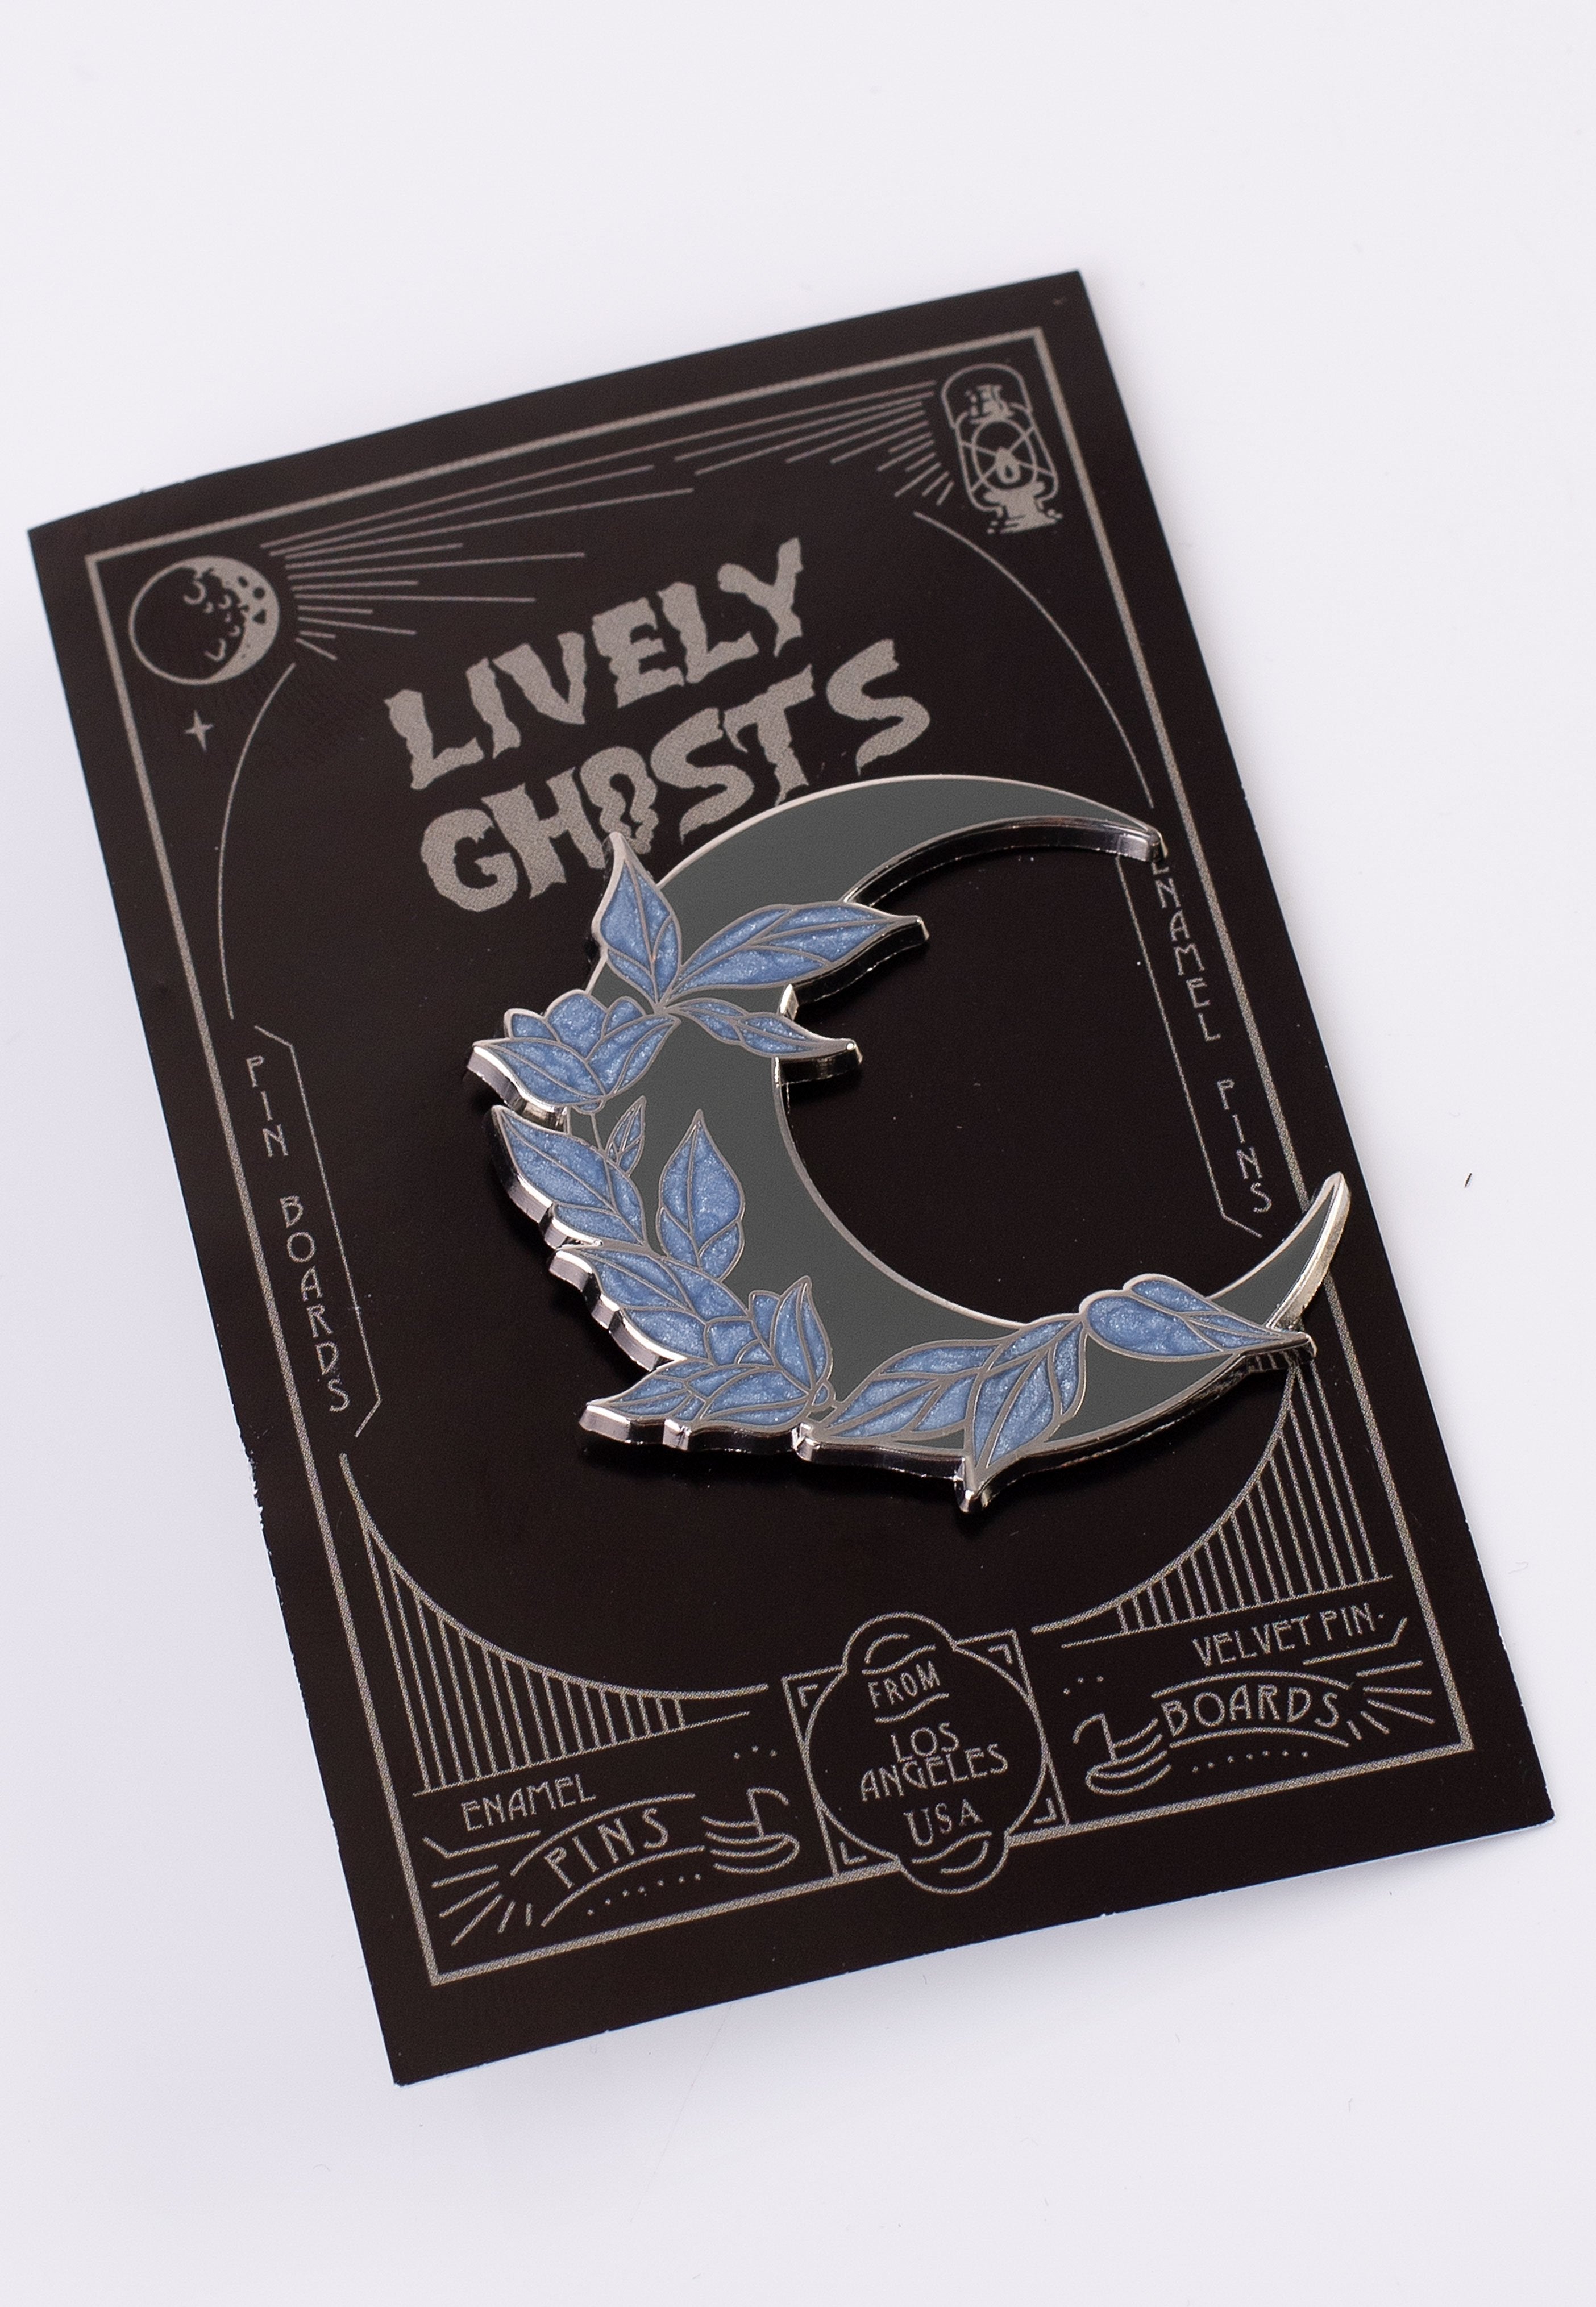 Lively Ghosts - Ethereal Moon - Pin